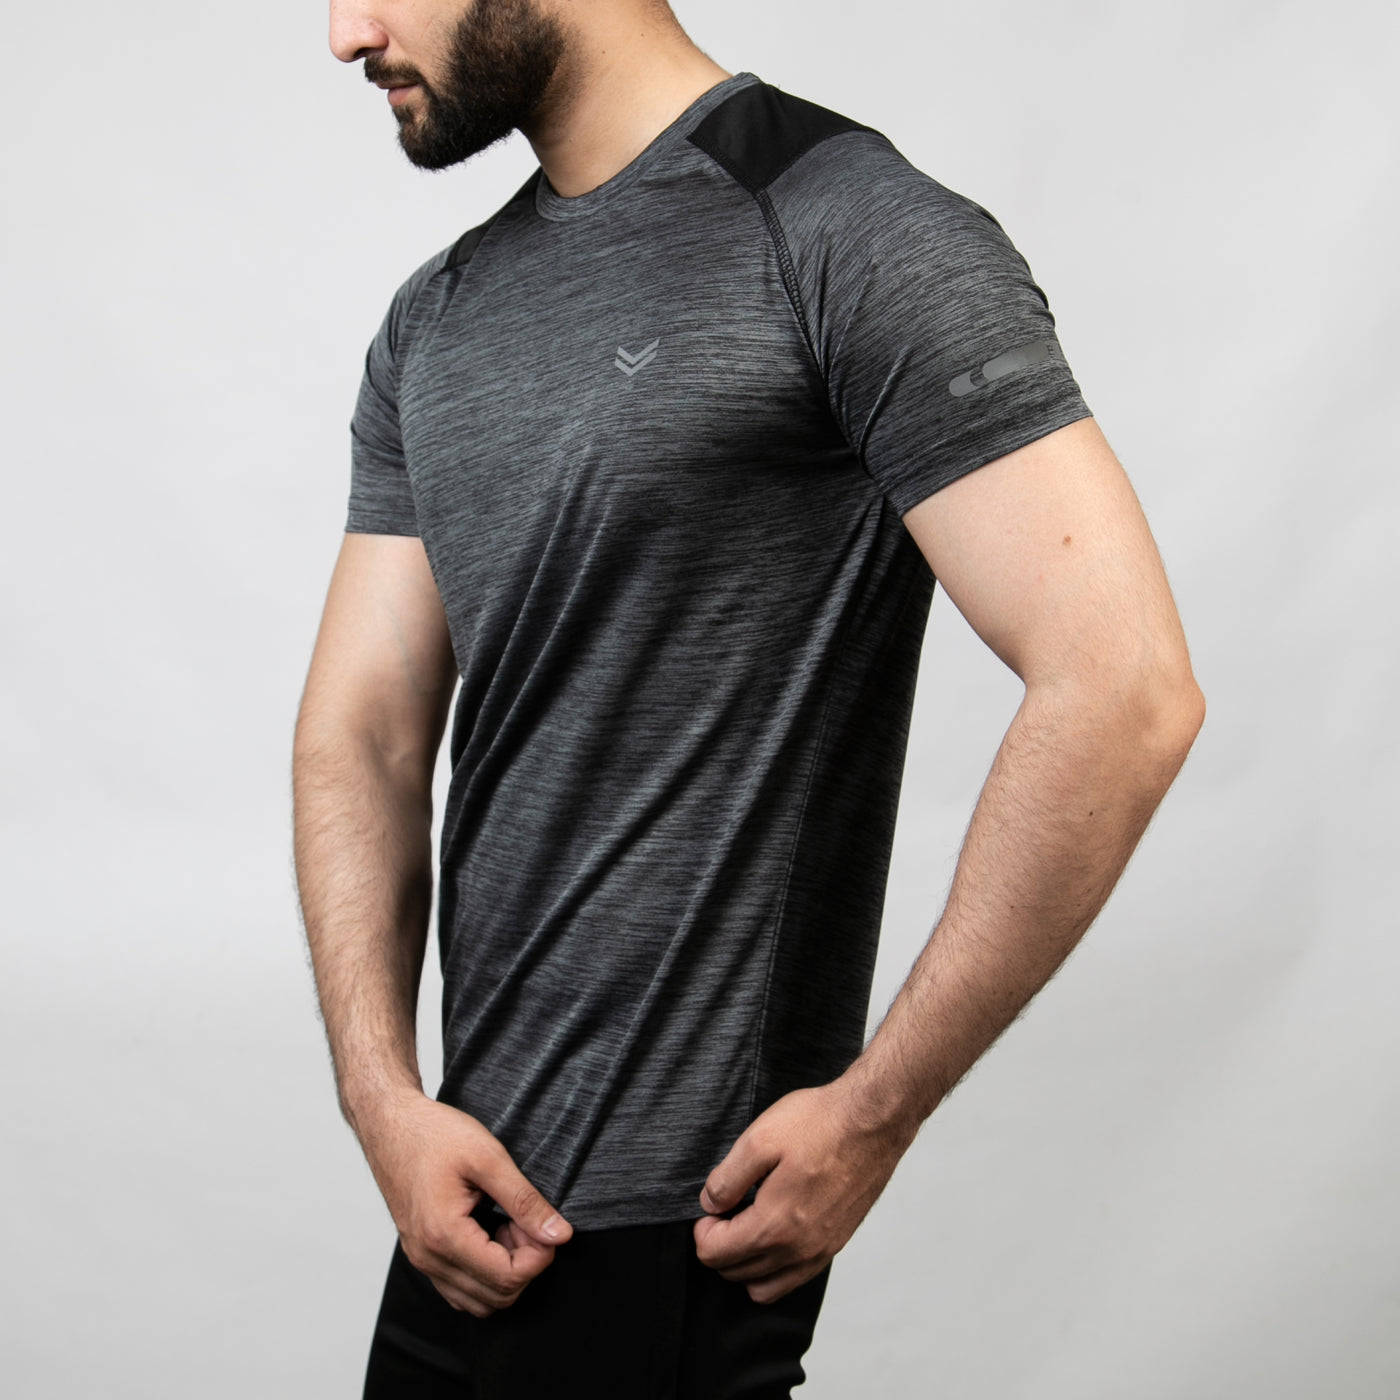 Textured Charcoal Quick Dry T-Shirt with Black Panels & Reflectors